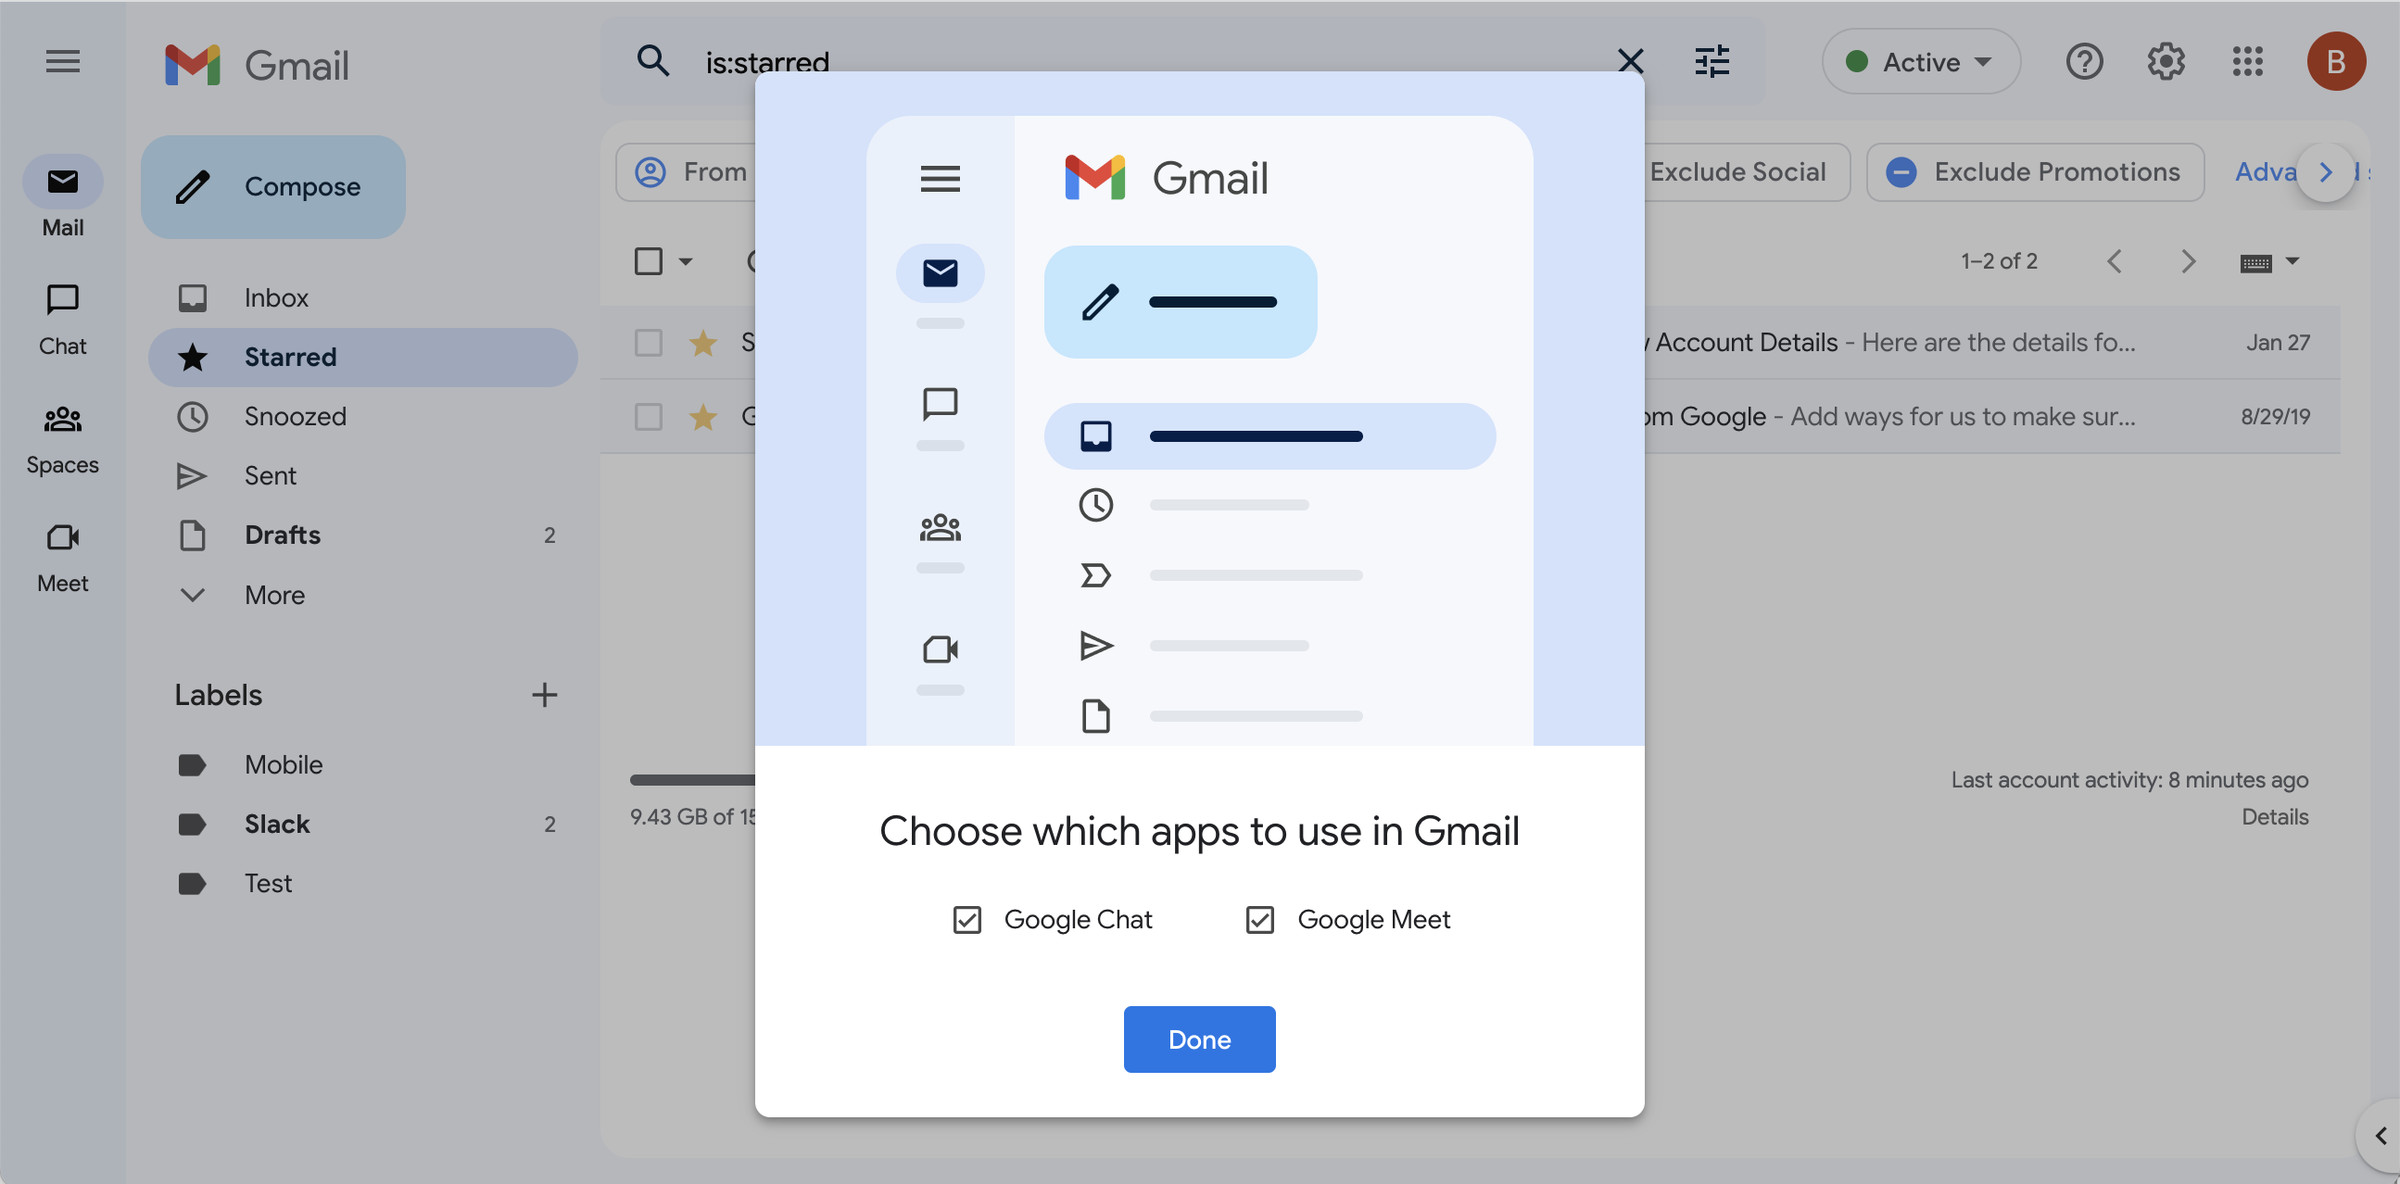 Popup for choosing which apps to use in Gmail